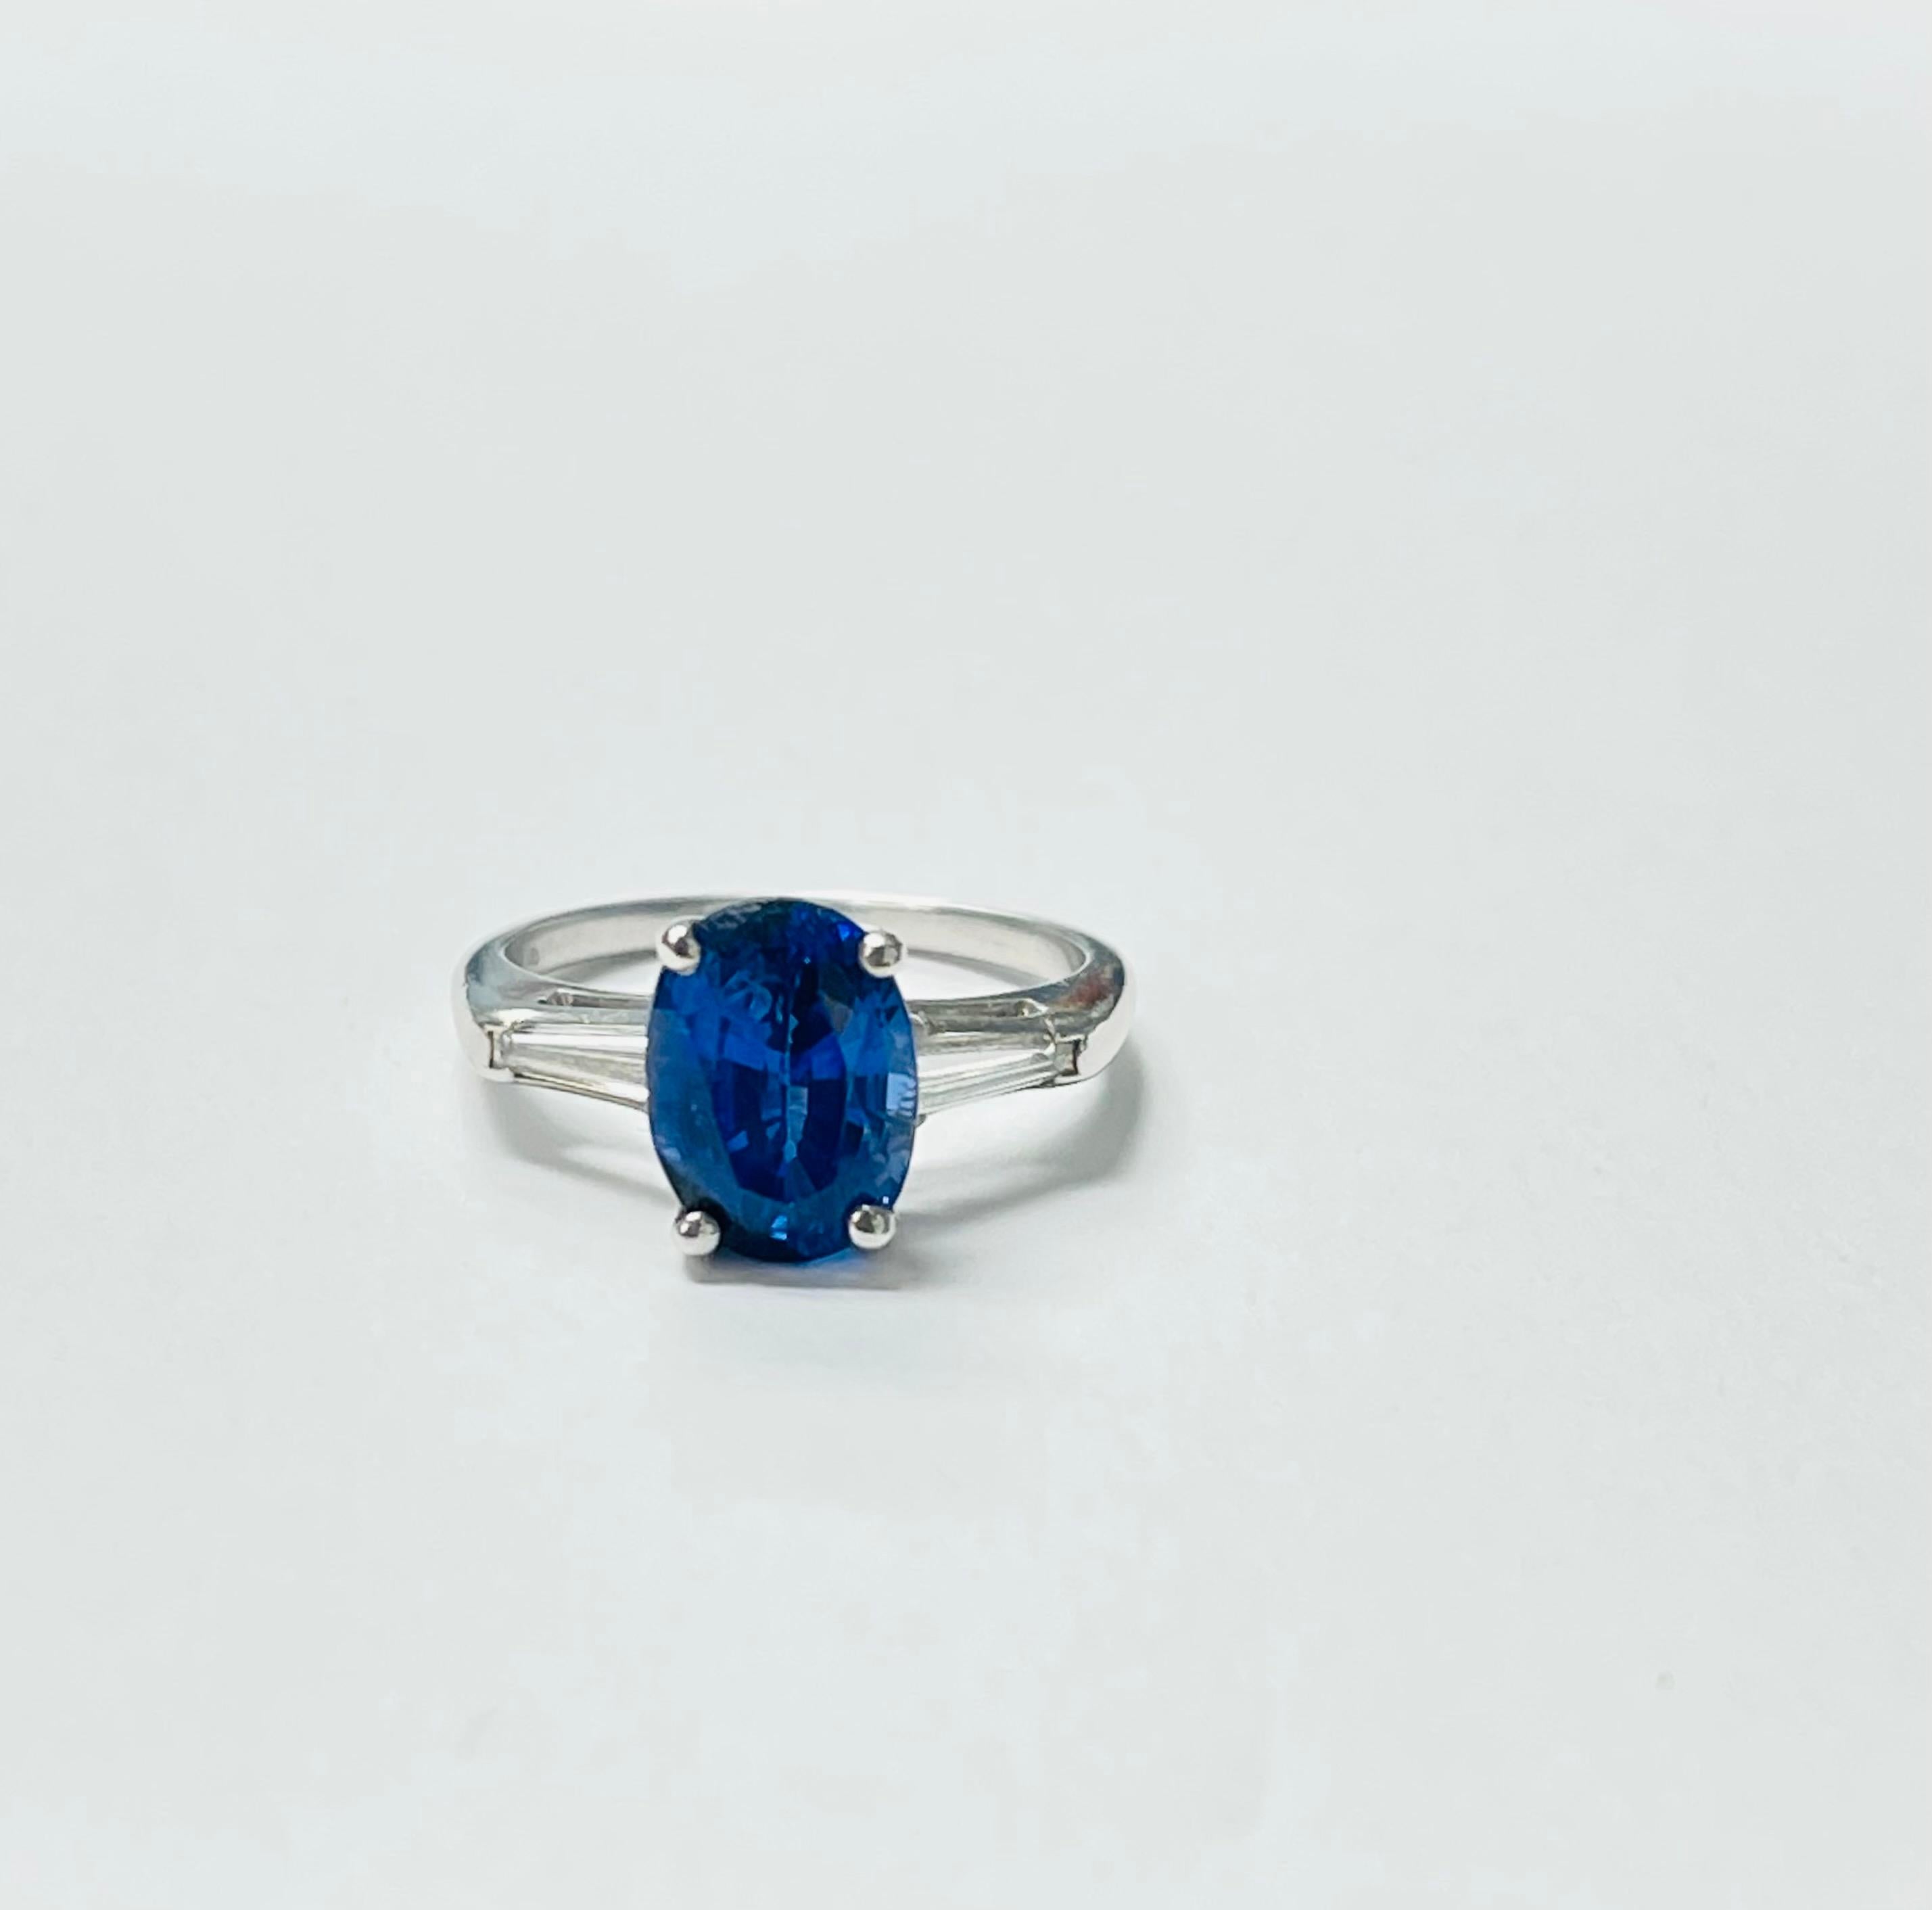 Gorgeous Royal blue sapphire and diamond engagement ring hand crafted in platinum. 
The details are as follows : 
Blue sapphire weight : 3.75 carats 
Diamond weight : 0.25 carats 
Metal : Platinum 
